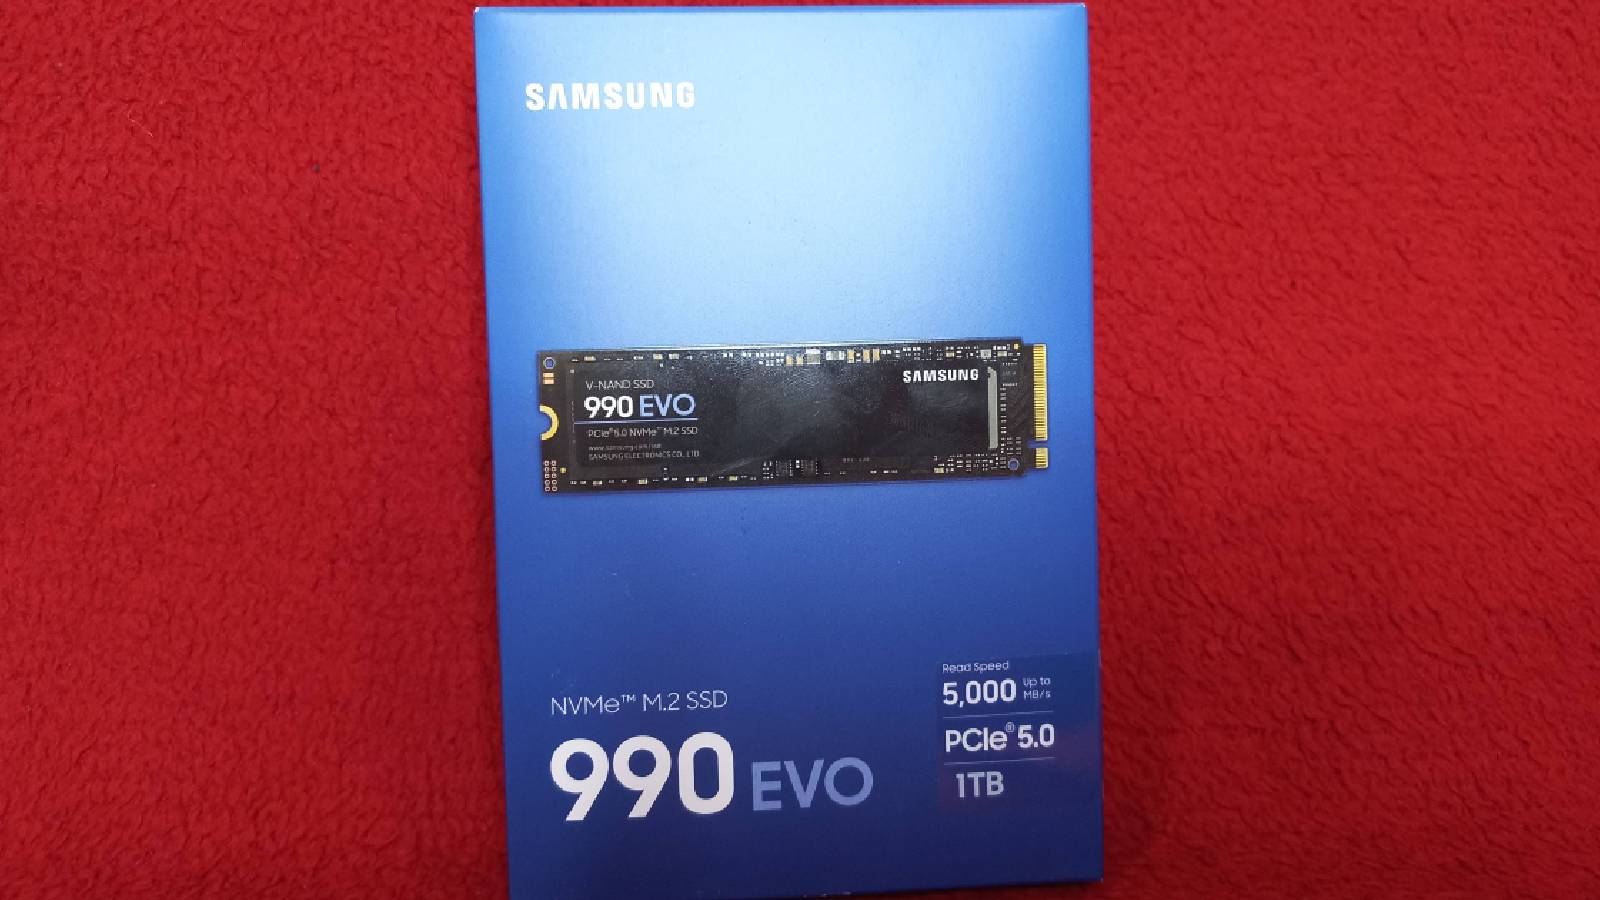 Samsung 990 Pro: Service life is said to decrease rapidly